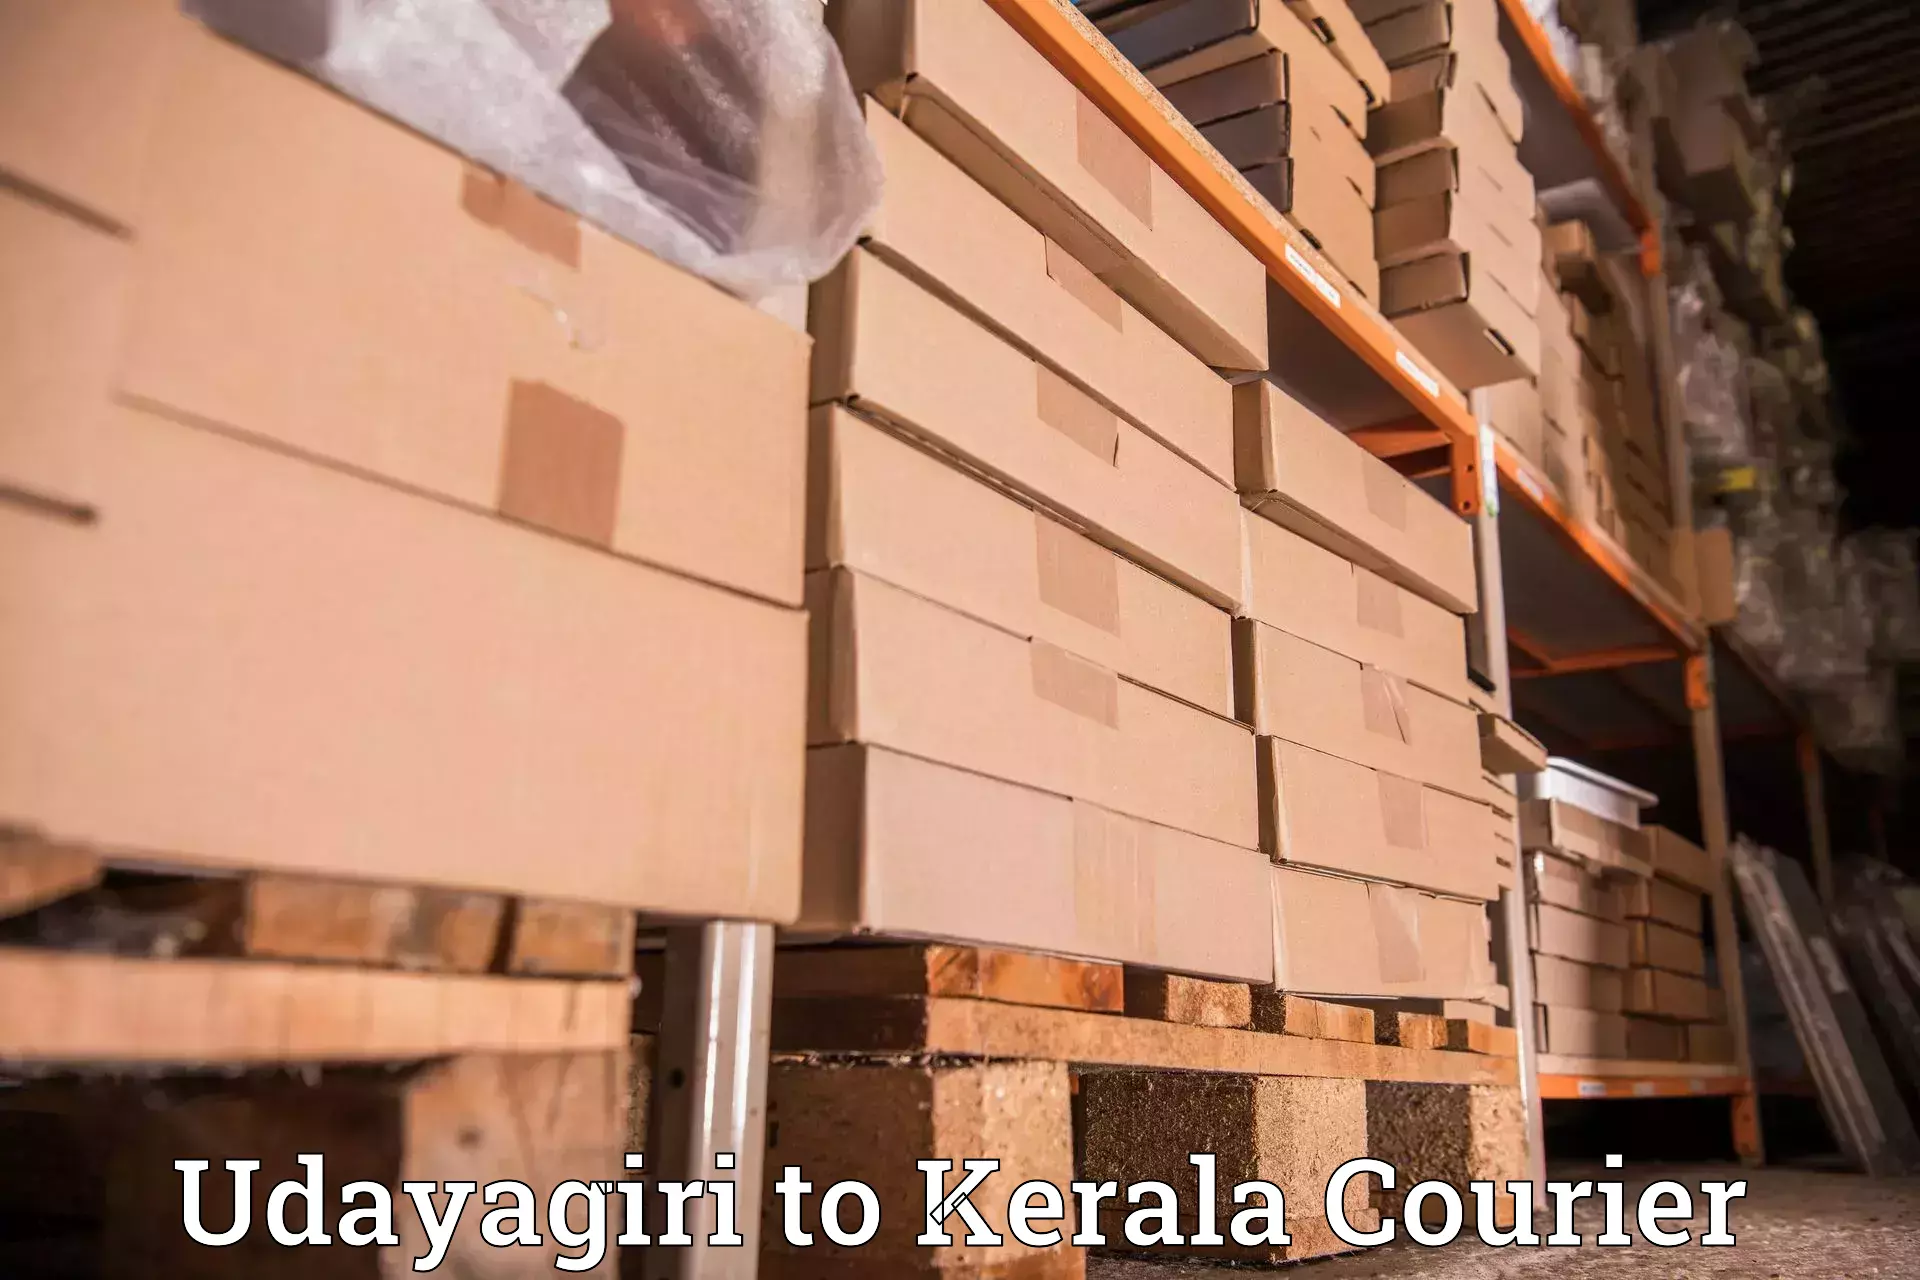 Express delivery solutions in Udayagiri to Cochin Port Kochi